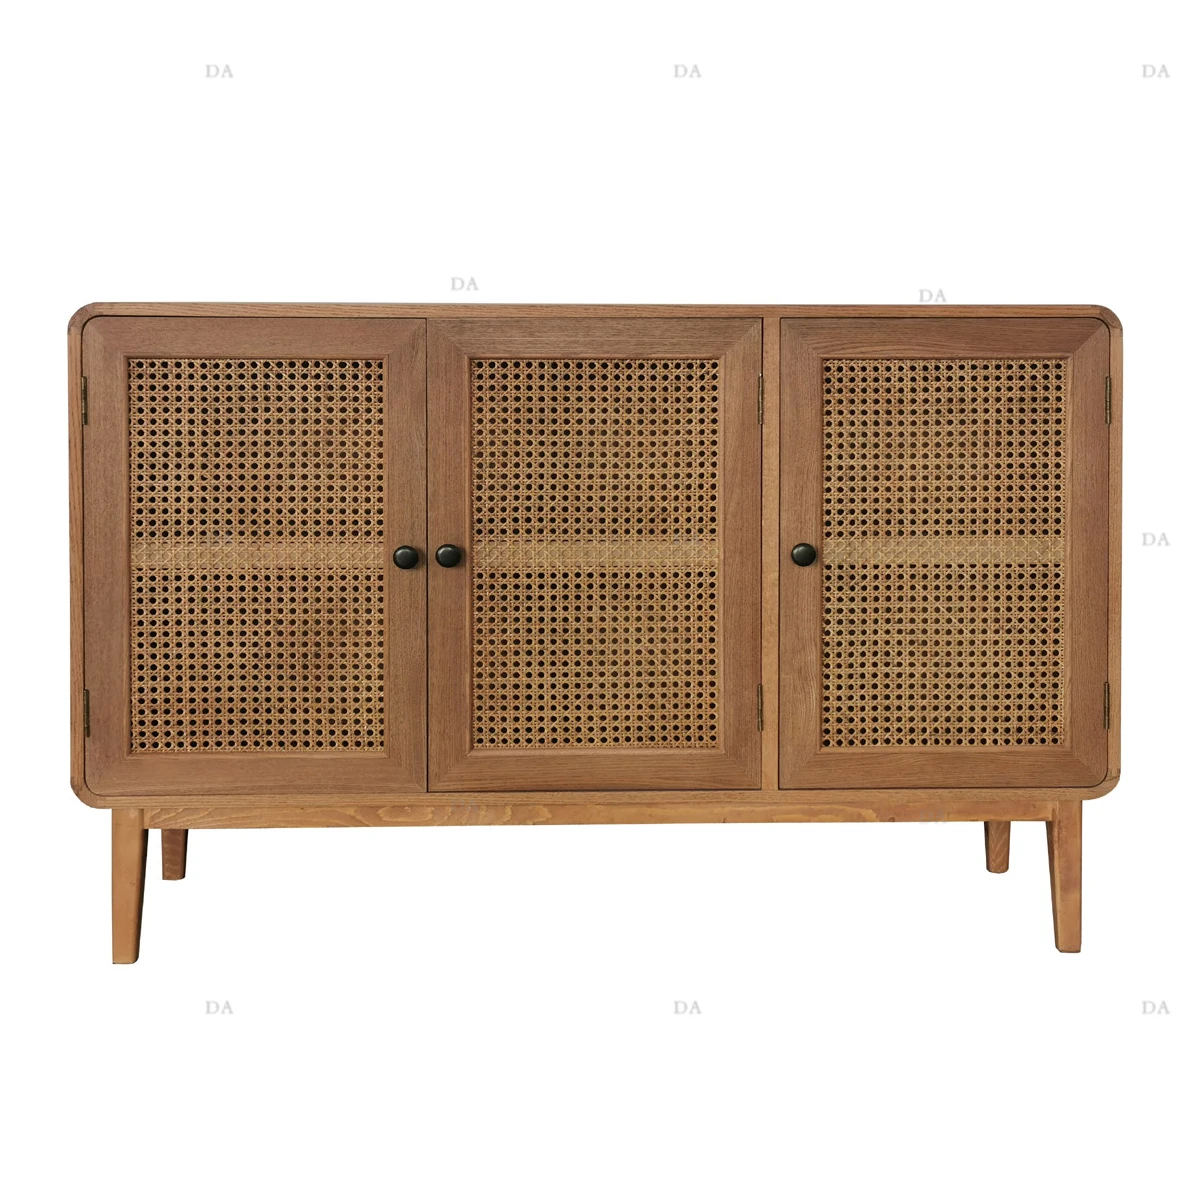 Modern Kitchen Cabinet Wooden Buffet Table 7 Drawer Cabinet Sideboard